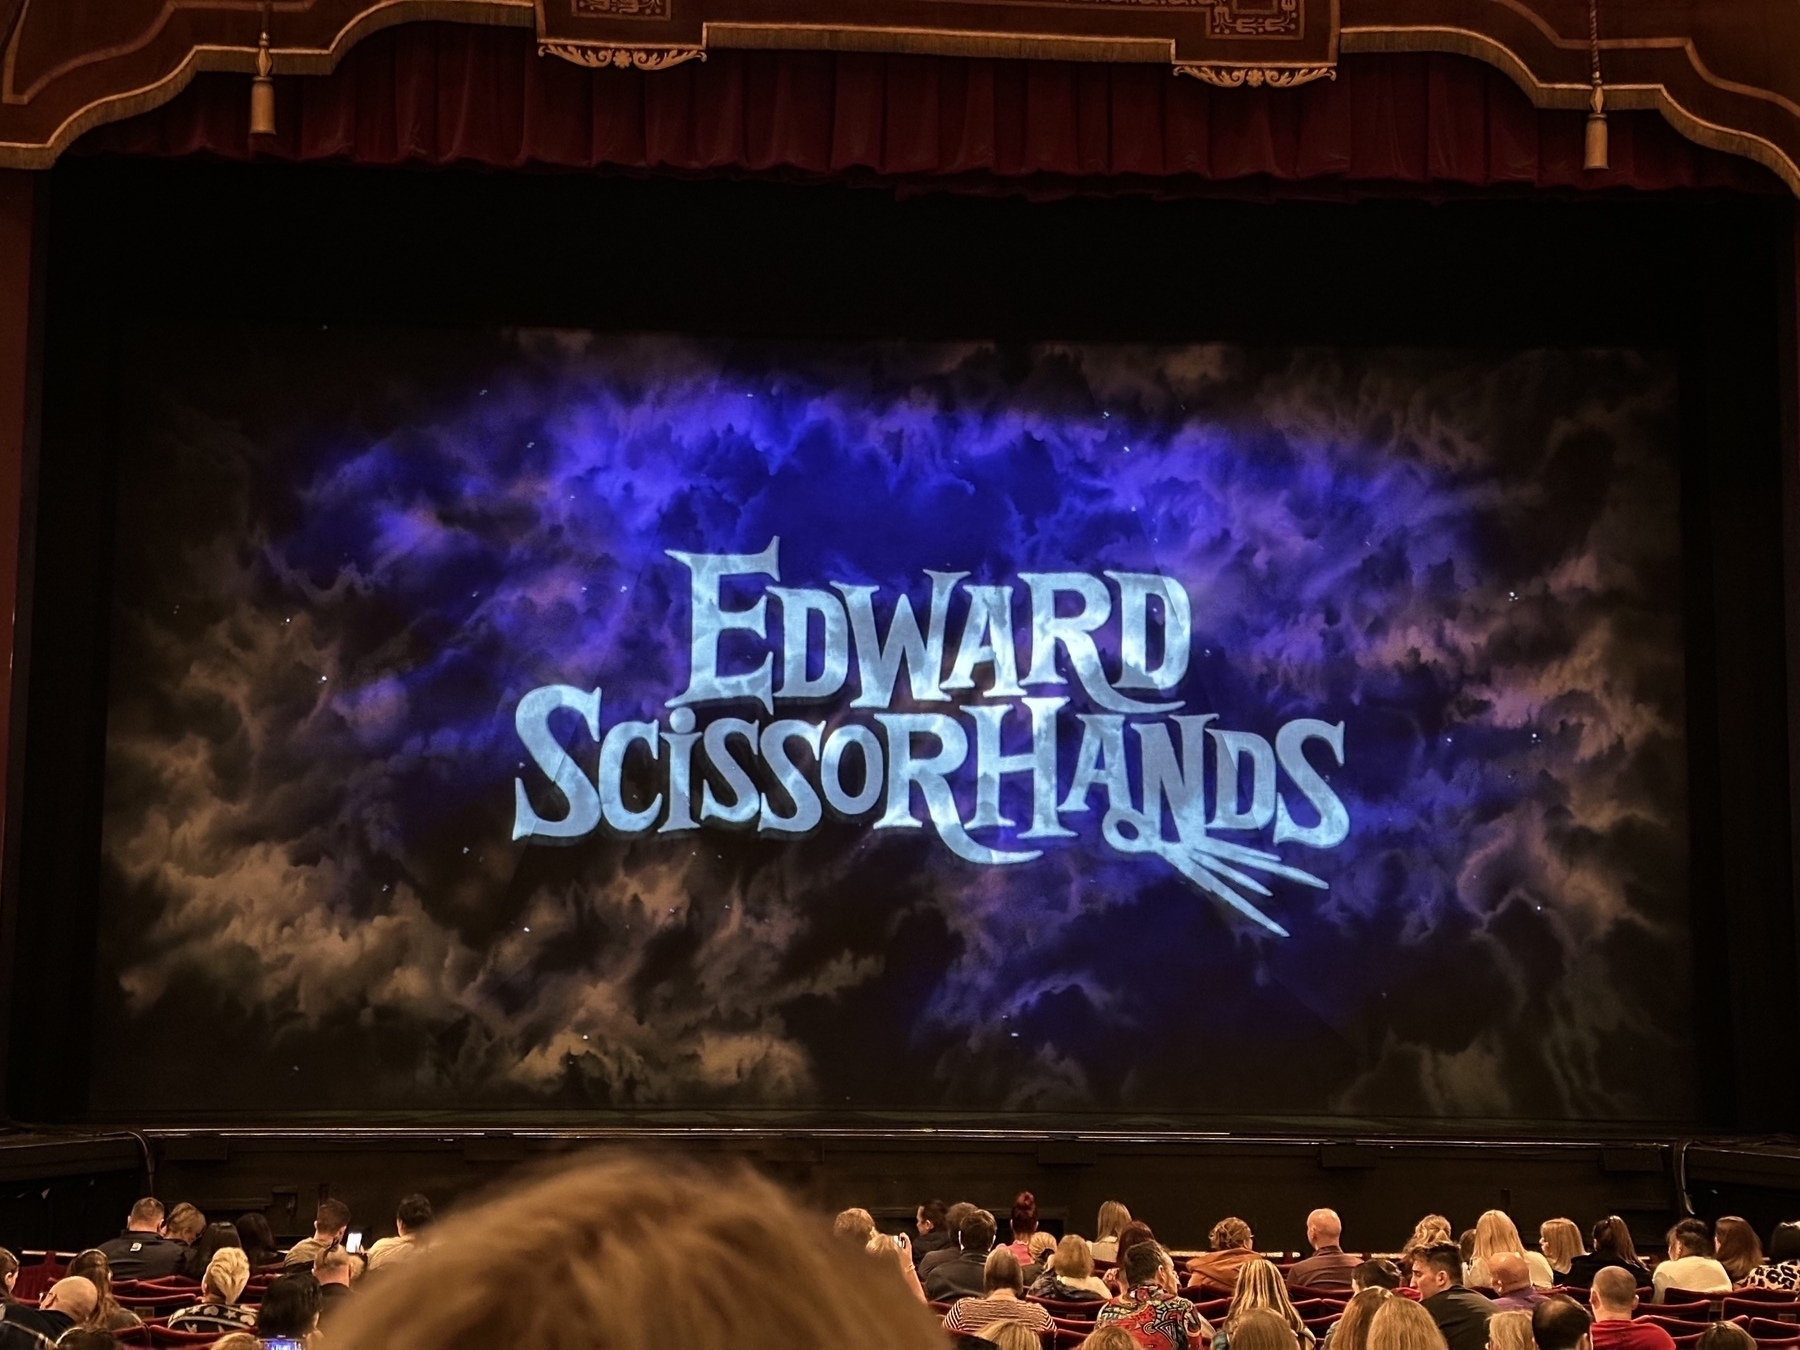 the stage for ‘Edward Scissorhands’